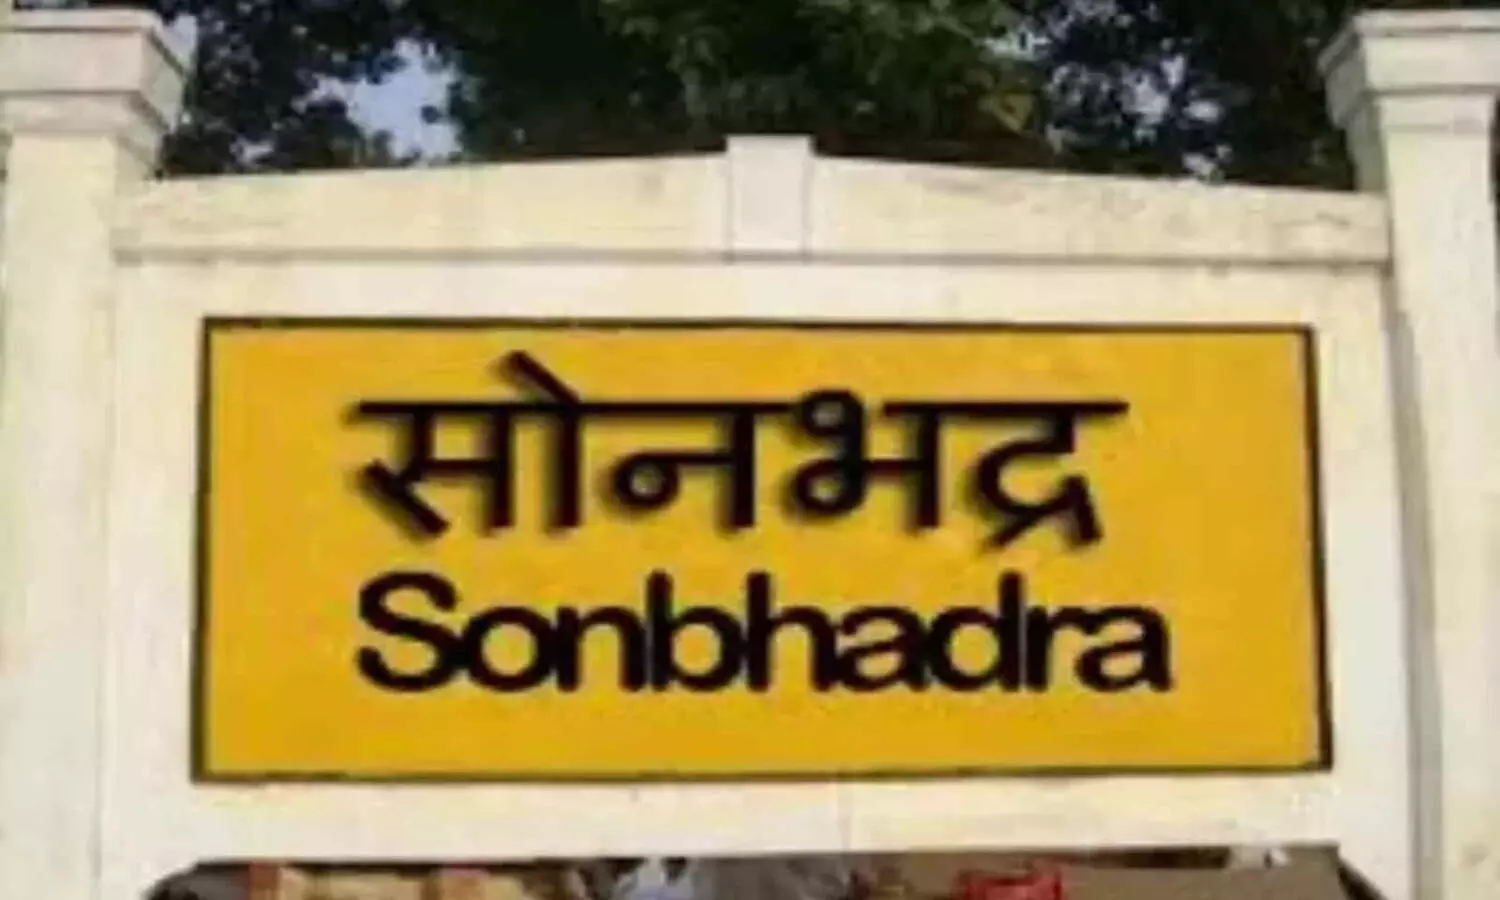 Sonbhadra Mining partner asked account beating with stick grabbing stake FIR against two